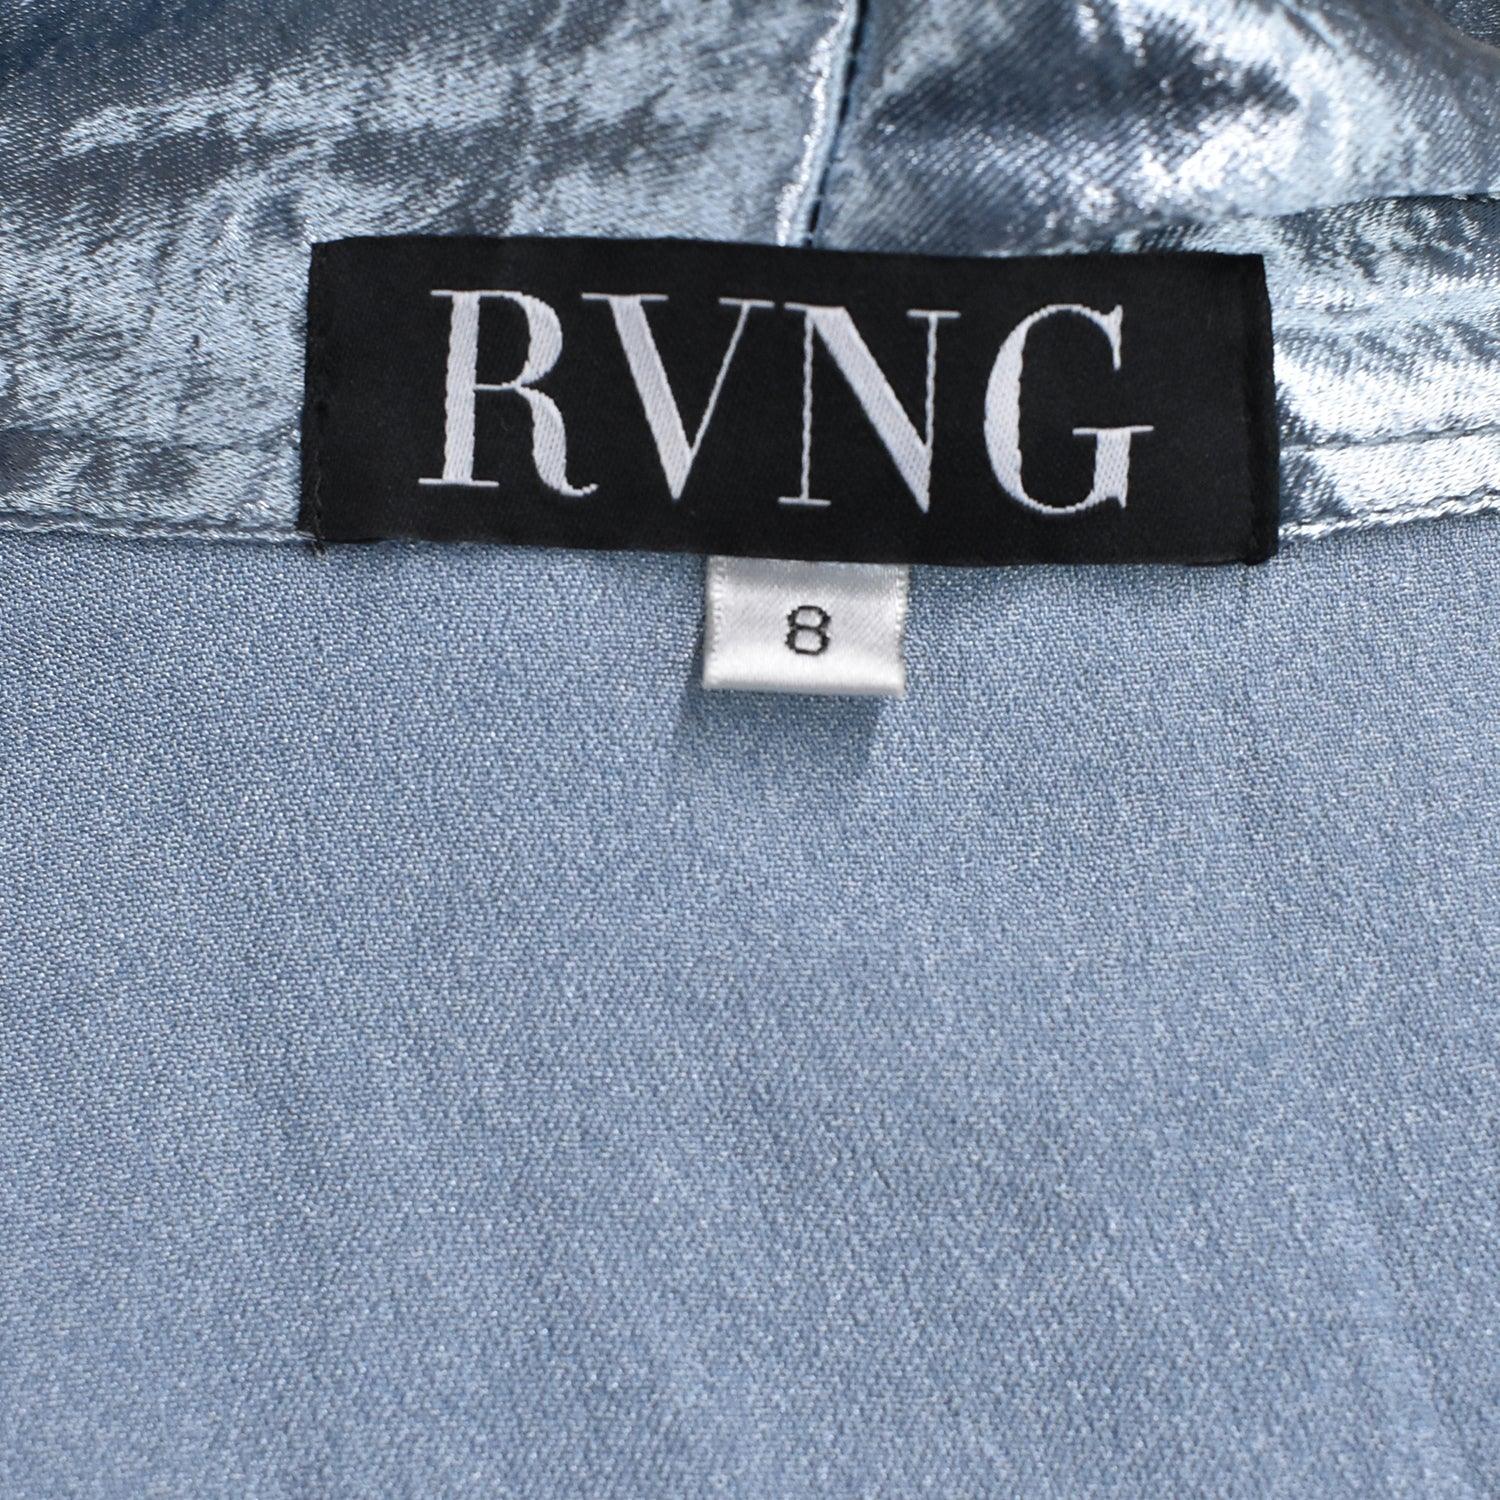 RVNG Dress - Women's 8 - Fashionably Yours